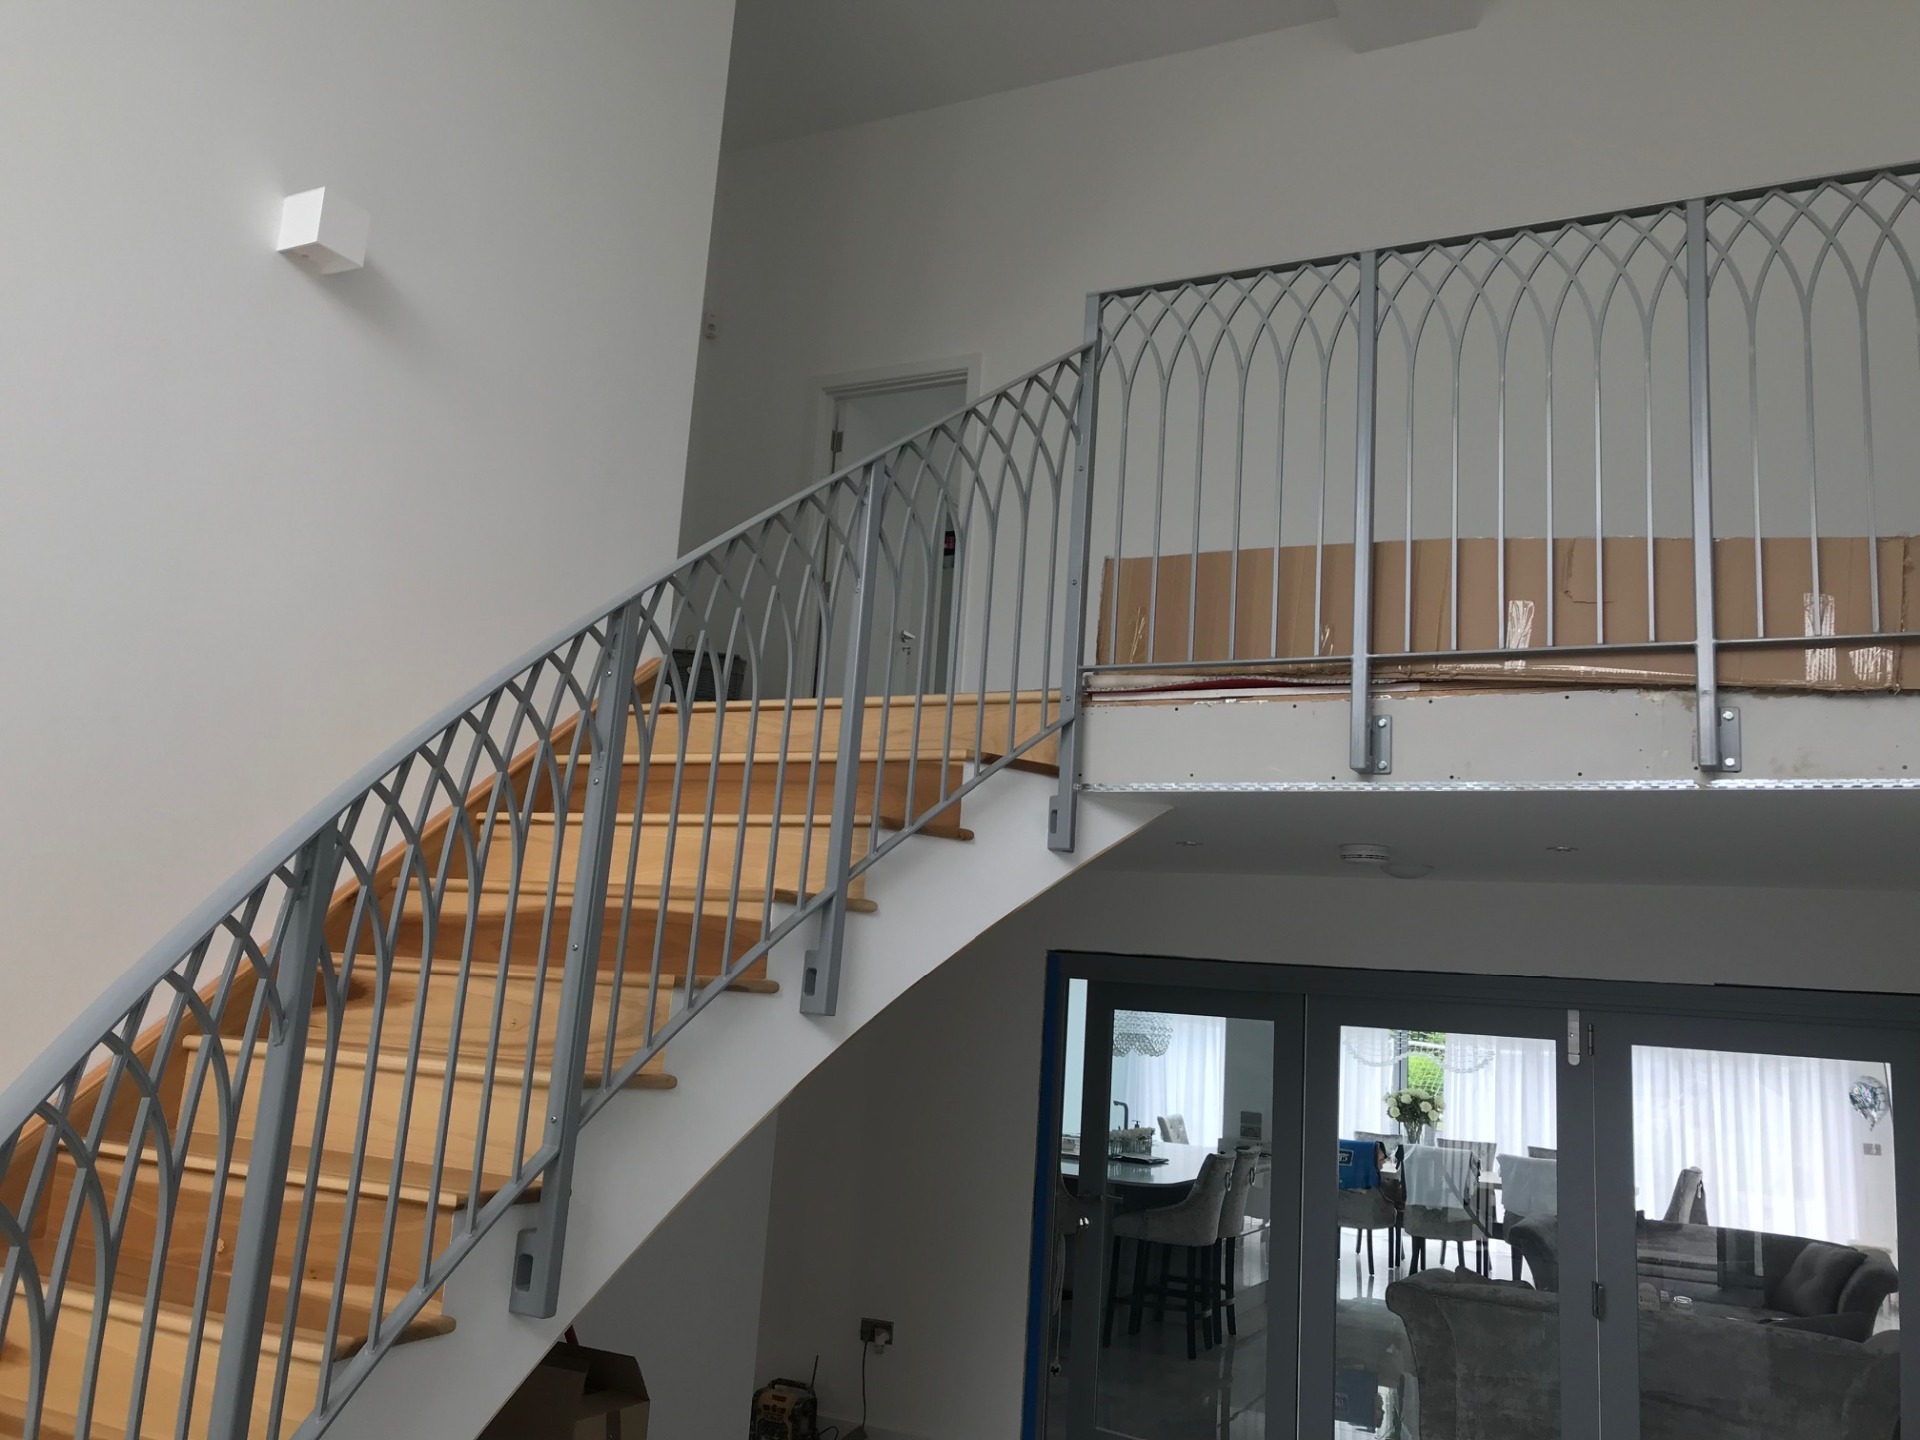 Bespoke Mild Steel Stair Balustrade with a Convex Handrail